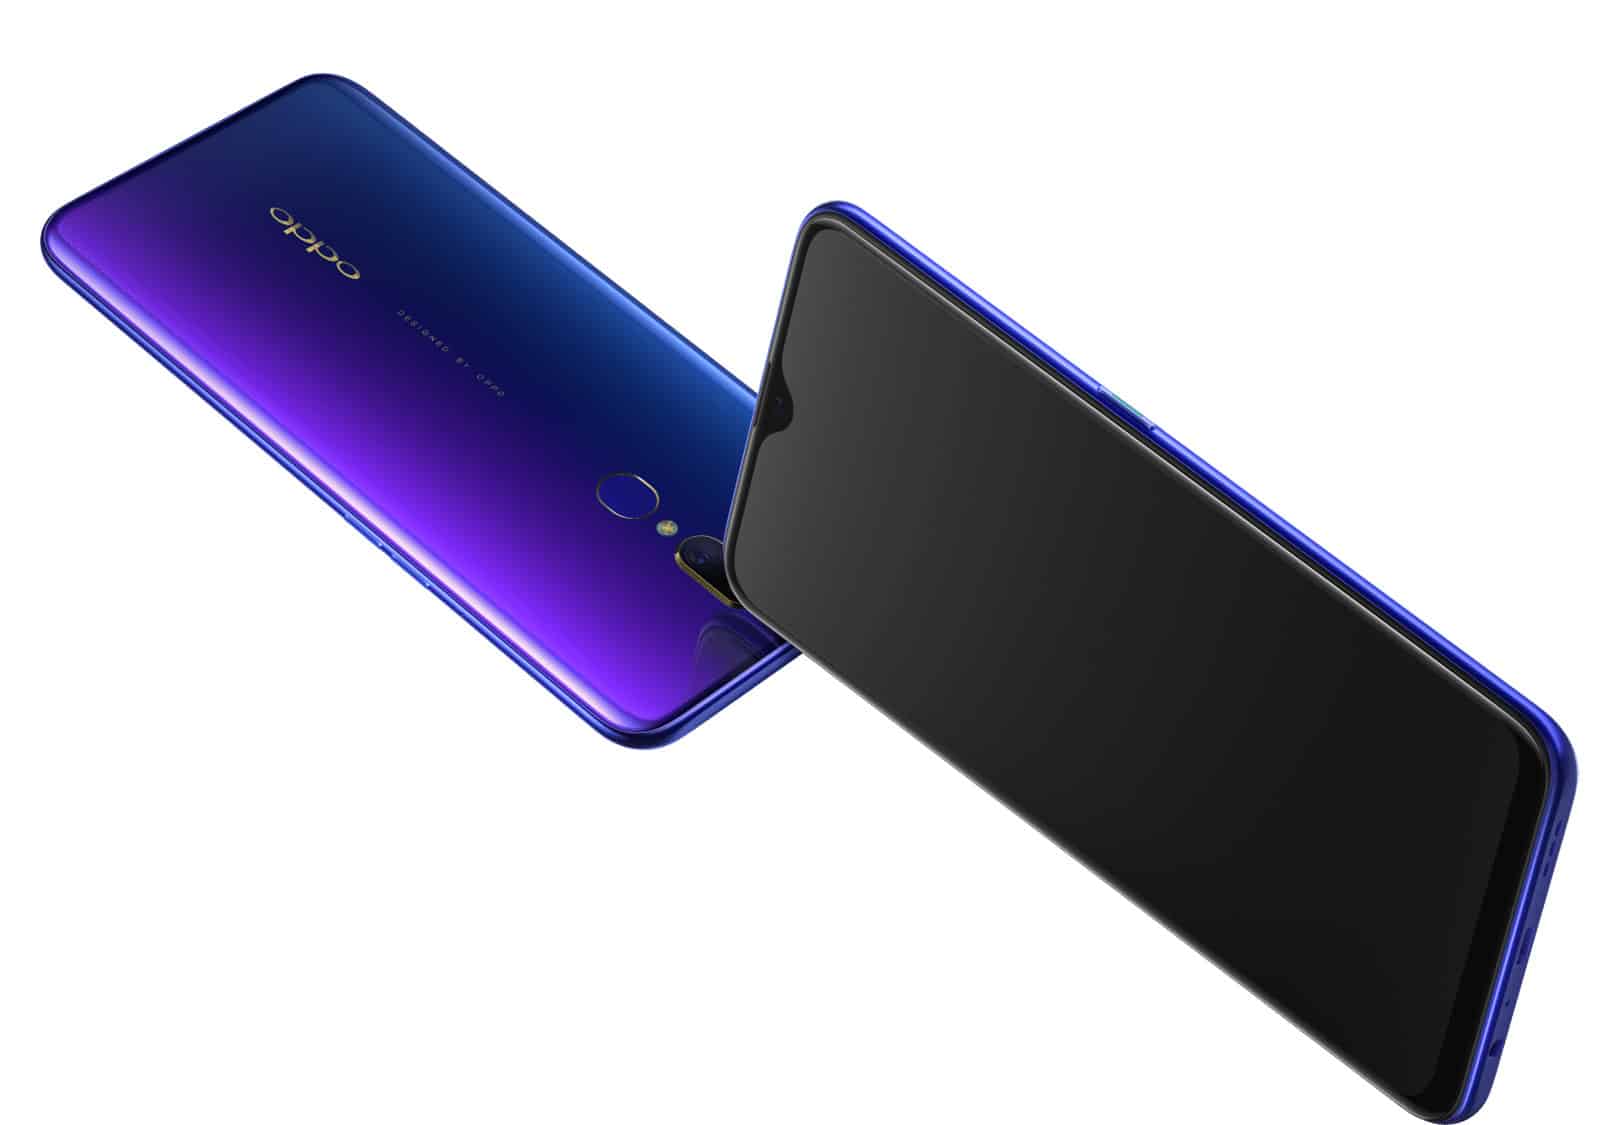 OPPO launches OPPO F11 in two dazzling colour variants Purple Blue and Dark Green.